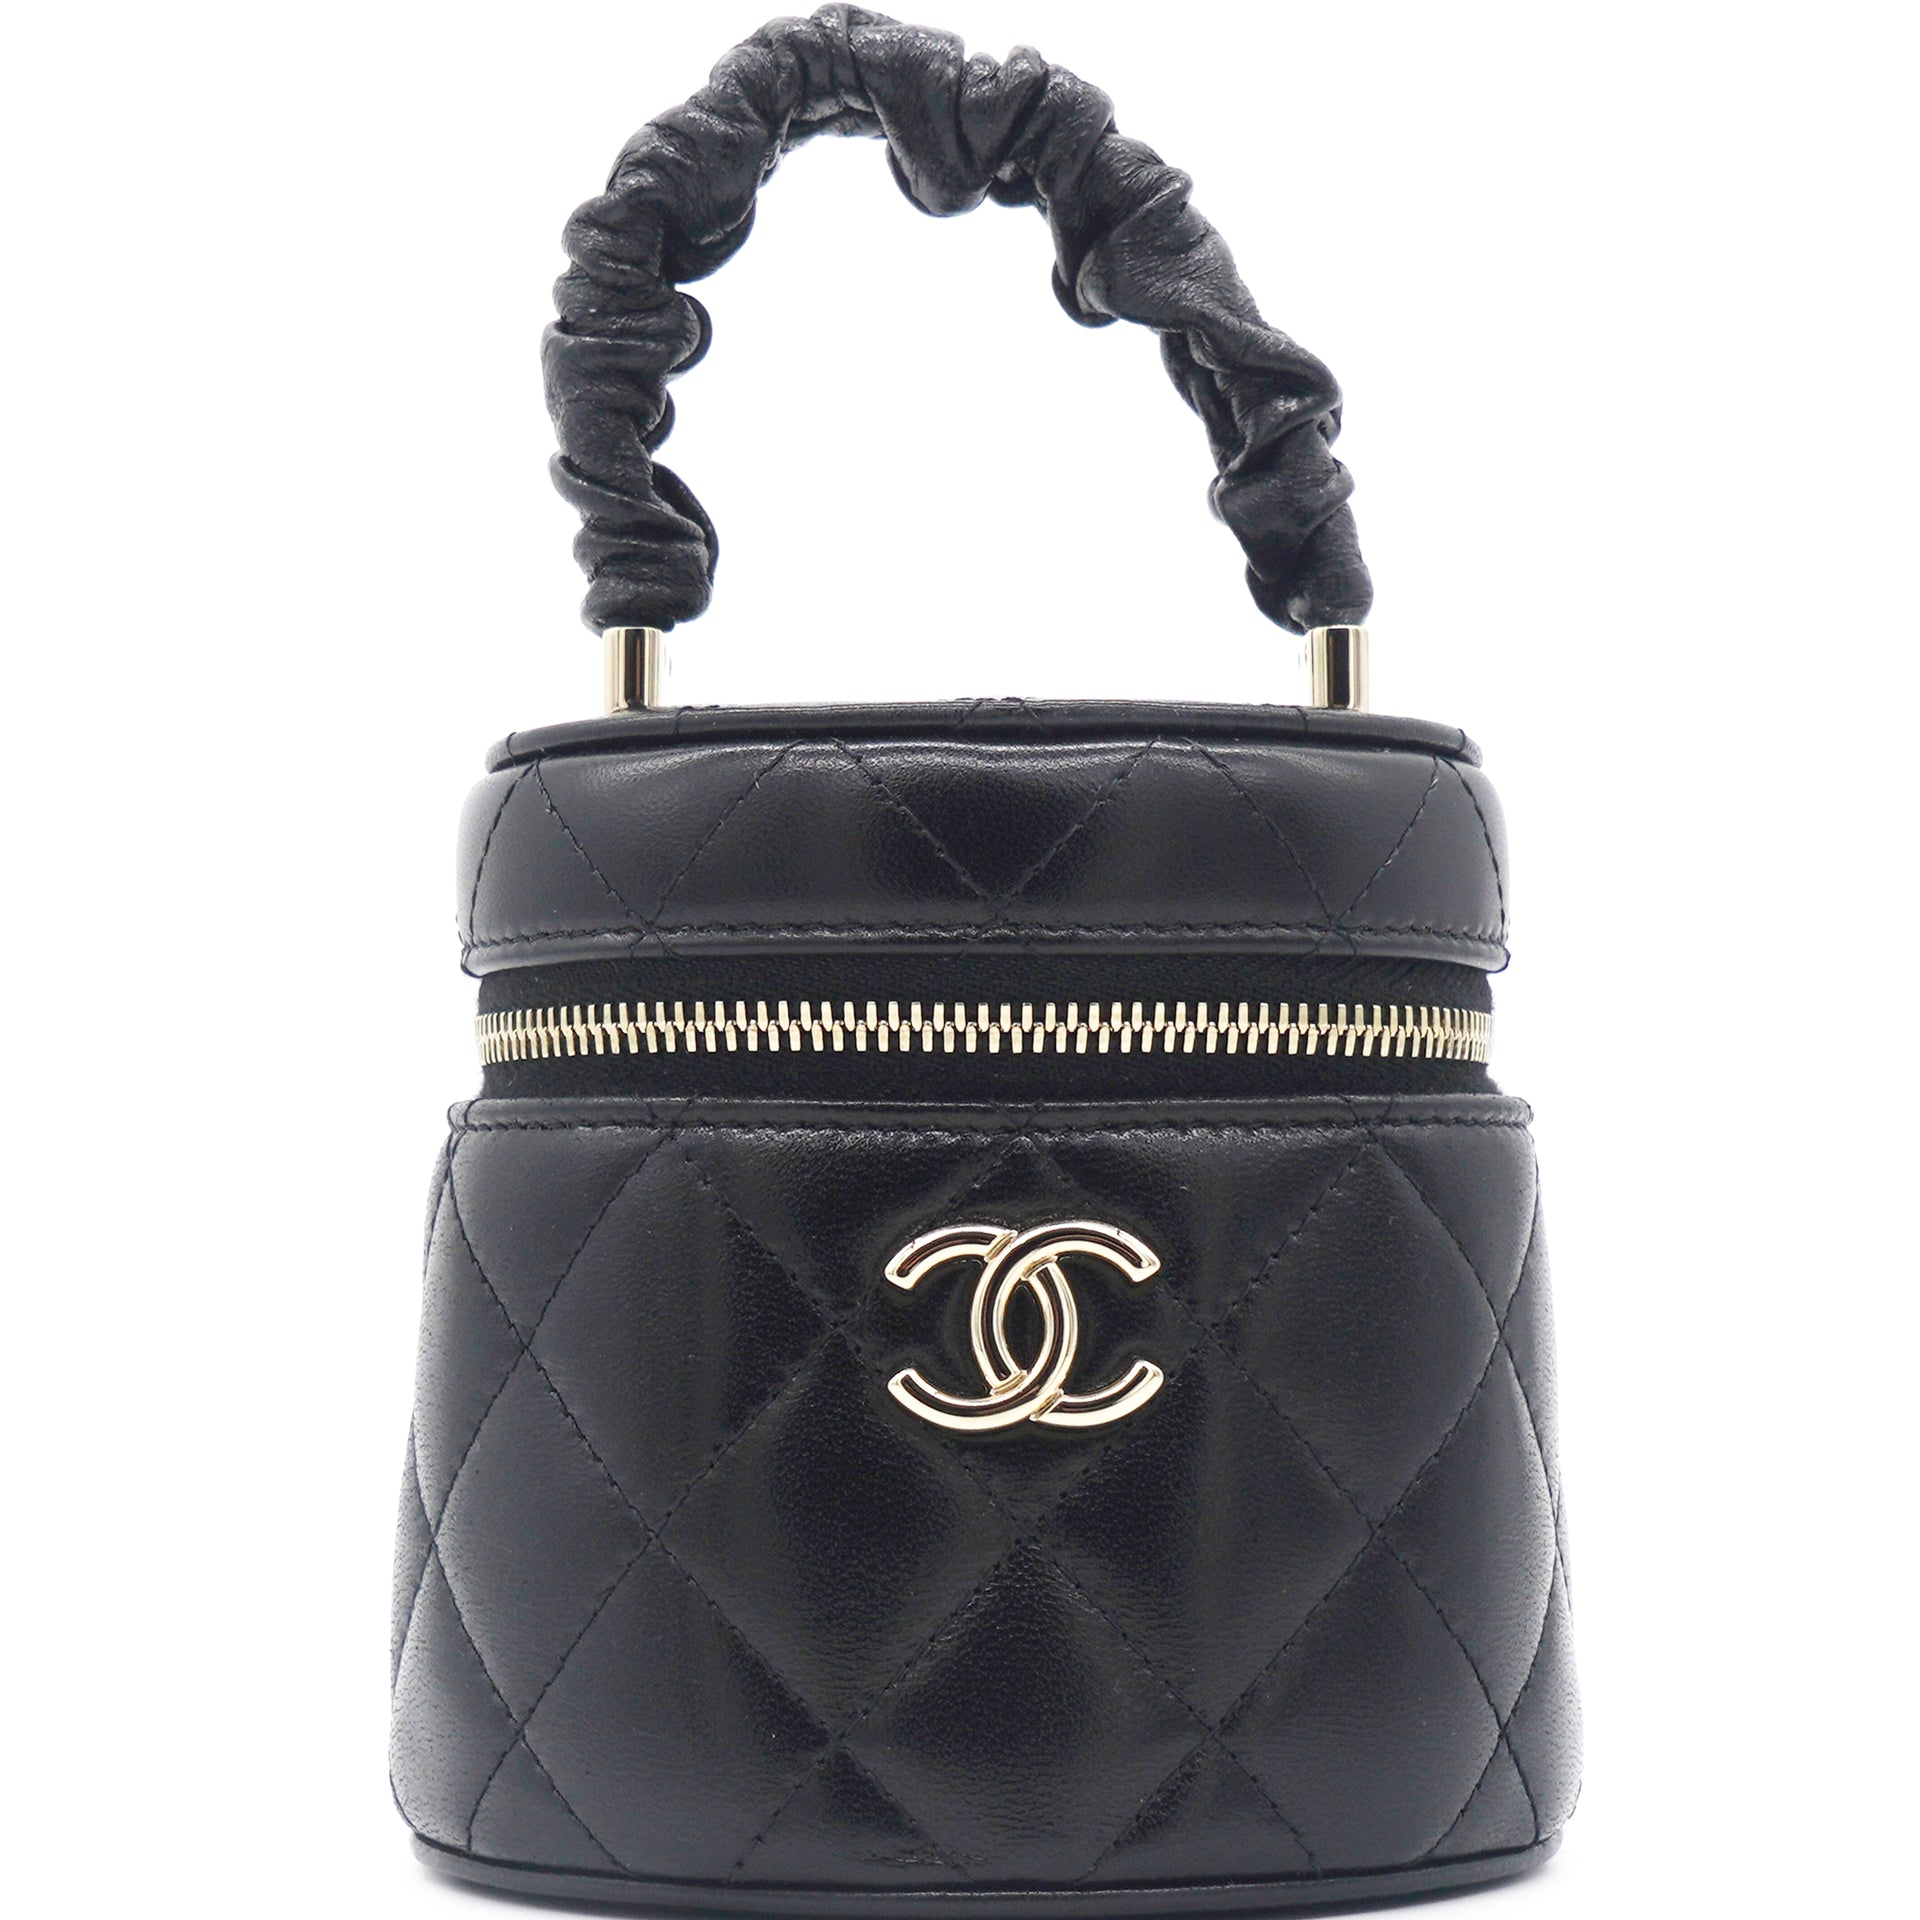 Chanel White Leather CC Vanity Chain Shoulder Bag Chanel